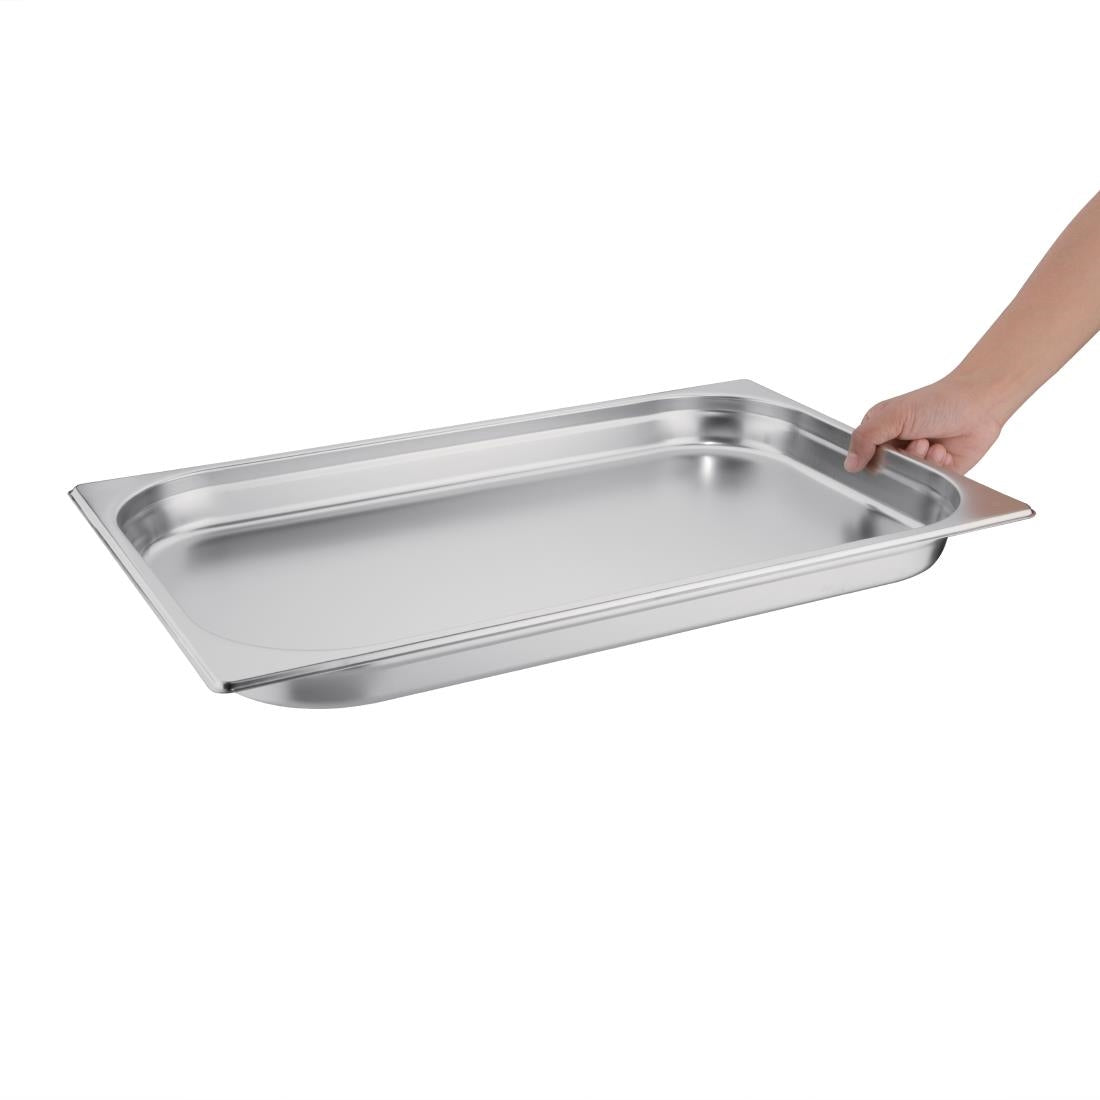 Vogue Stainless Steel 1/1 Gastronorm Pan 40mm